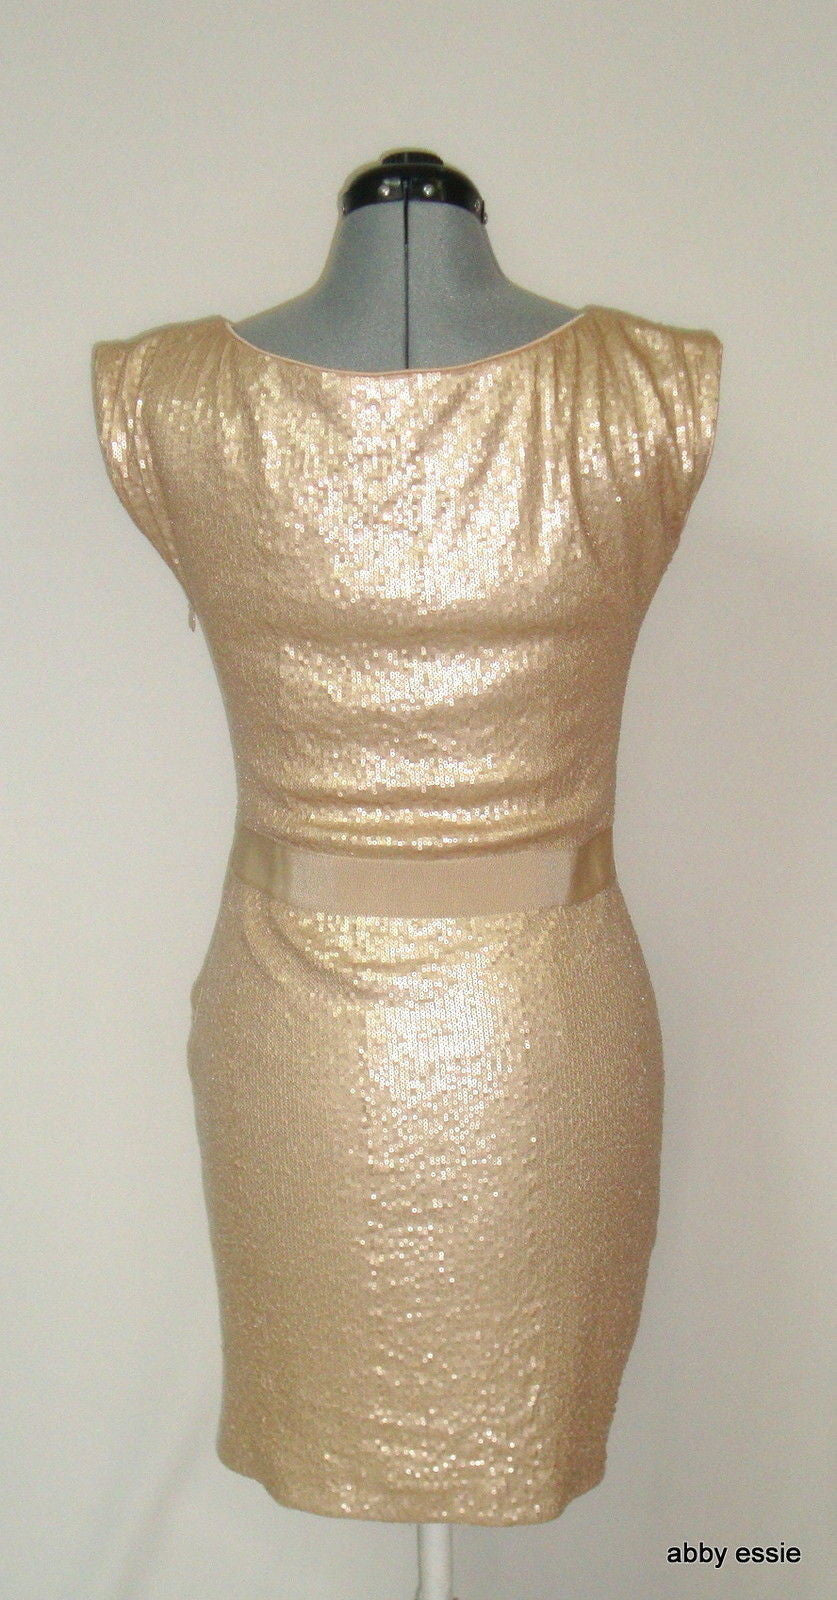 NWT LAUNDRY Shelli Segal Cream Nude Sequin Stretch Cocktail Formal Dress Abby Essie